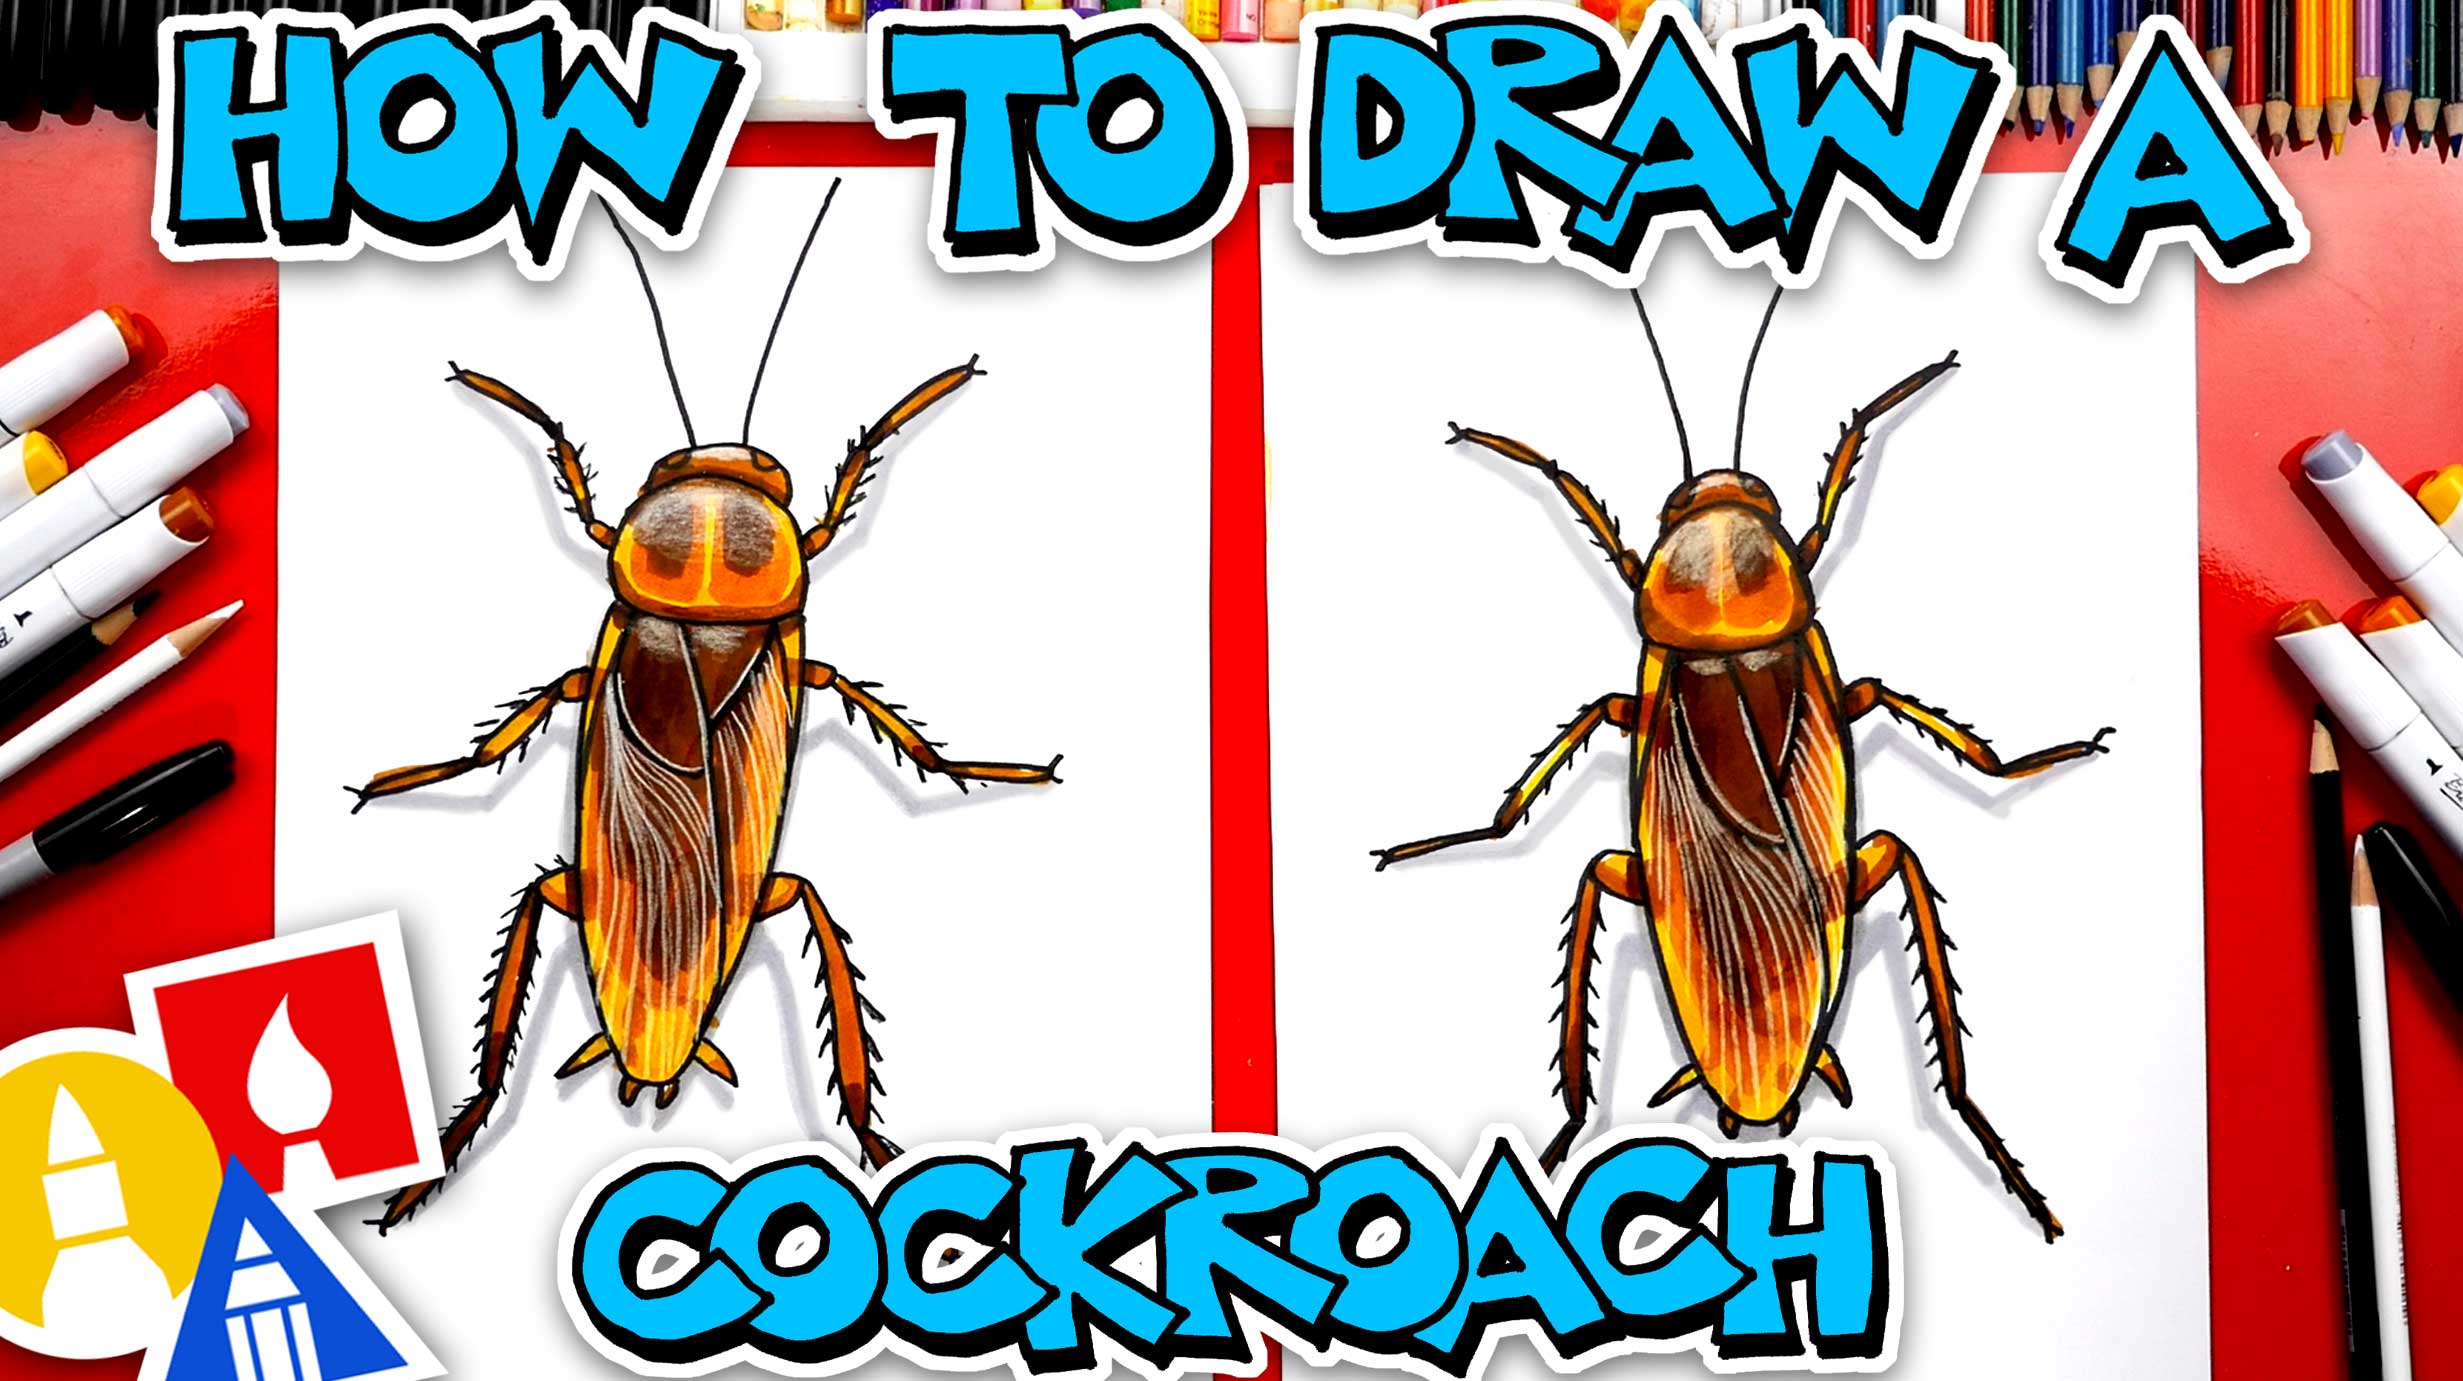 How To Draw A Cockroach Art For Kids Hub